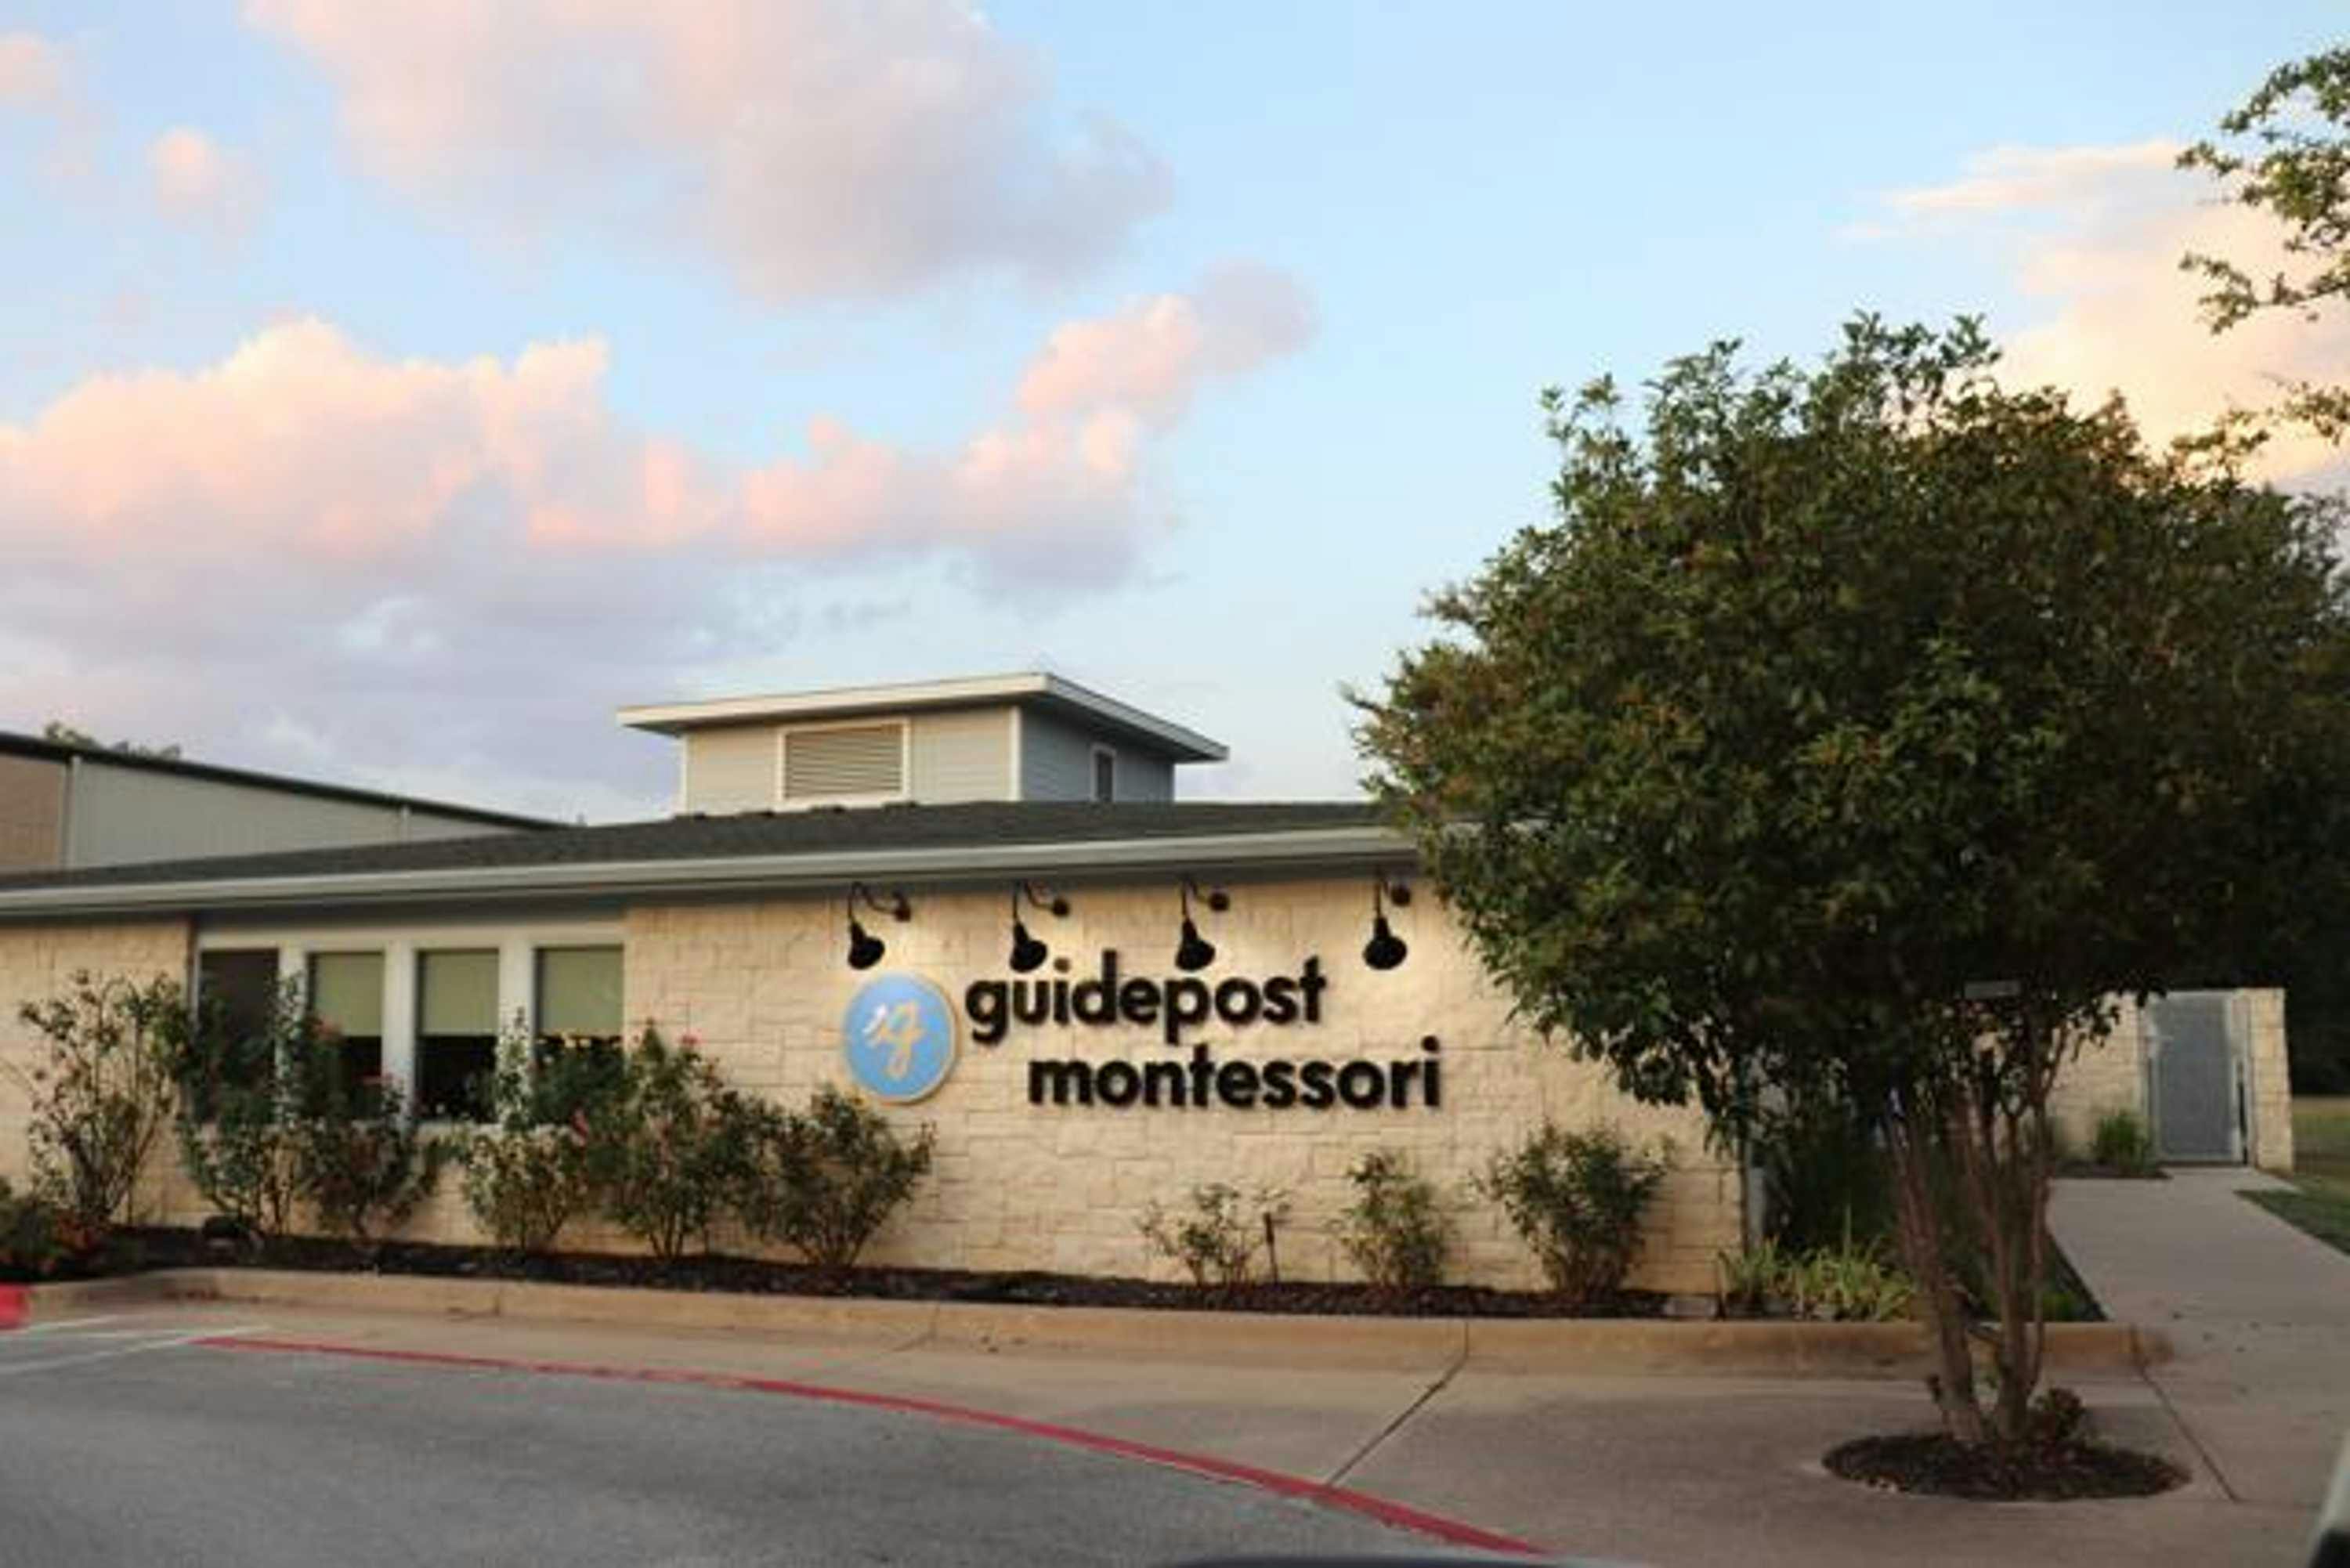 View of Guidepost Montessori at Cypress Creek from the parking lot that shows the block facade of the one-story building with a branded Guidepost Montessori sign. Some bushes line the building and a lone tree stands to the right. A sunset looms in the background.